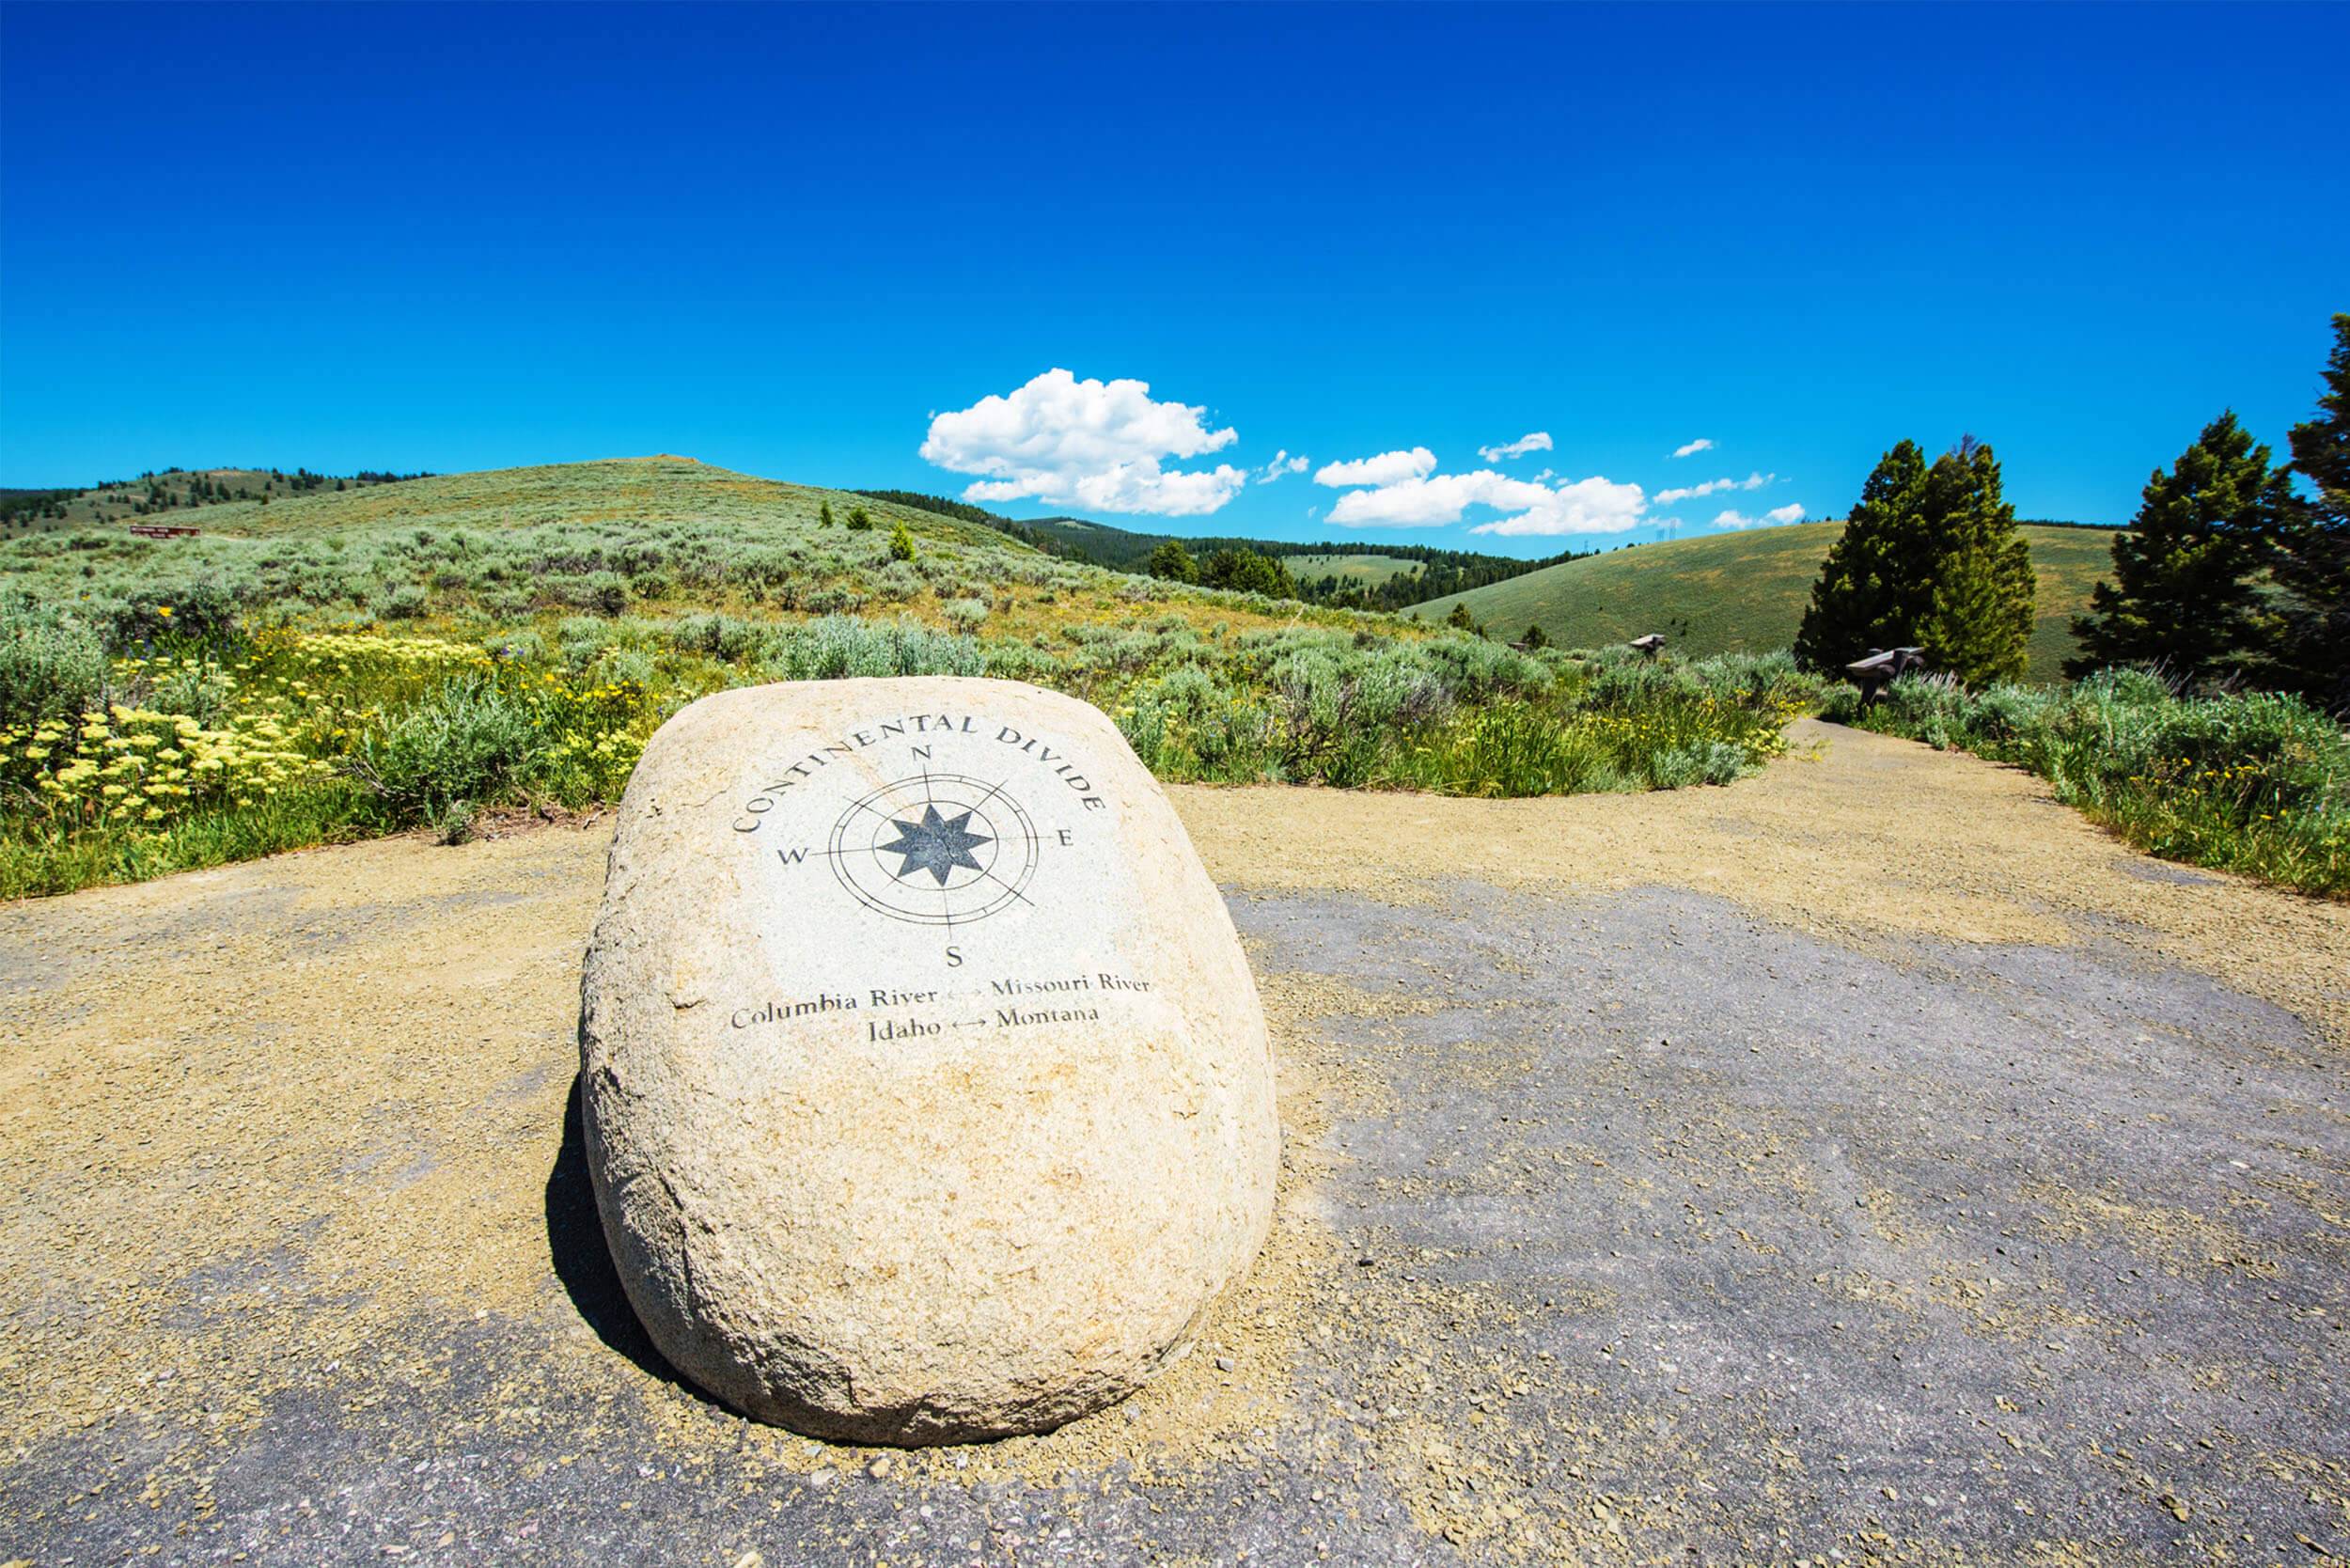 The Continental Divide Trail Marker in front of a Lemhi landscape